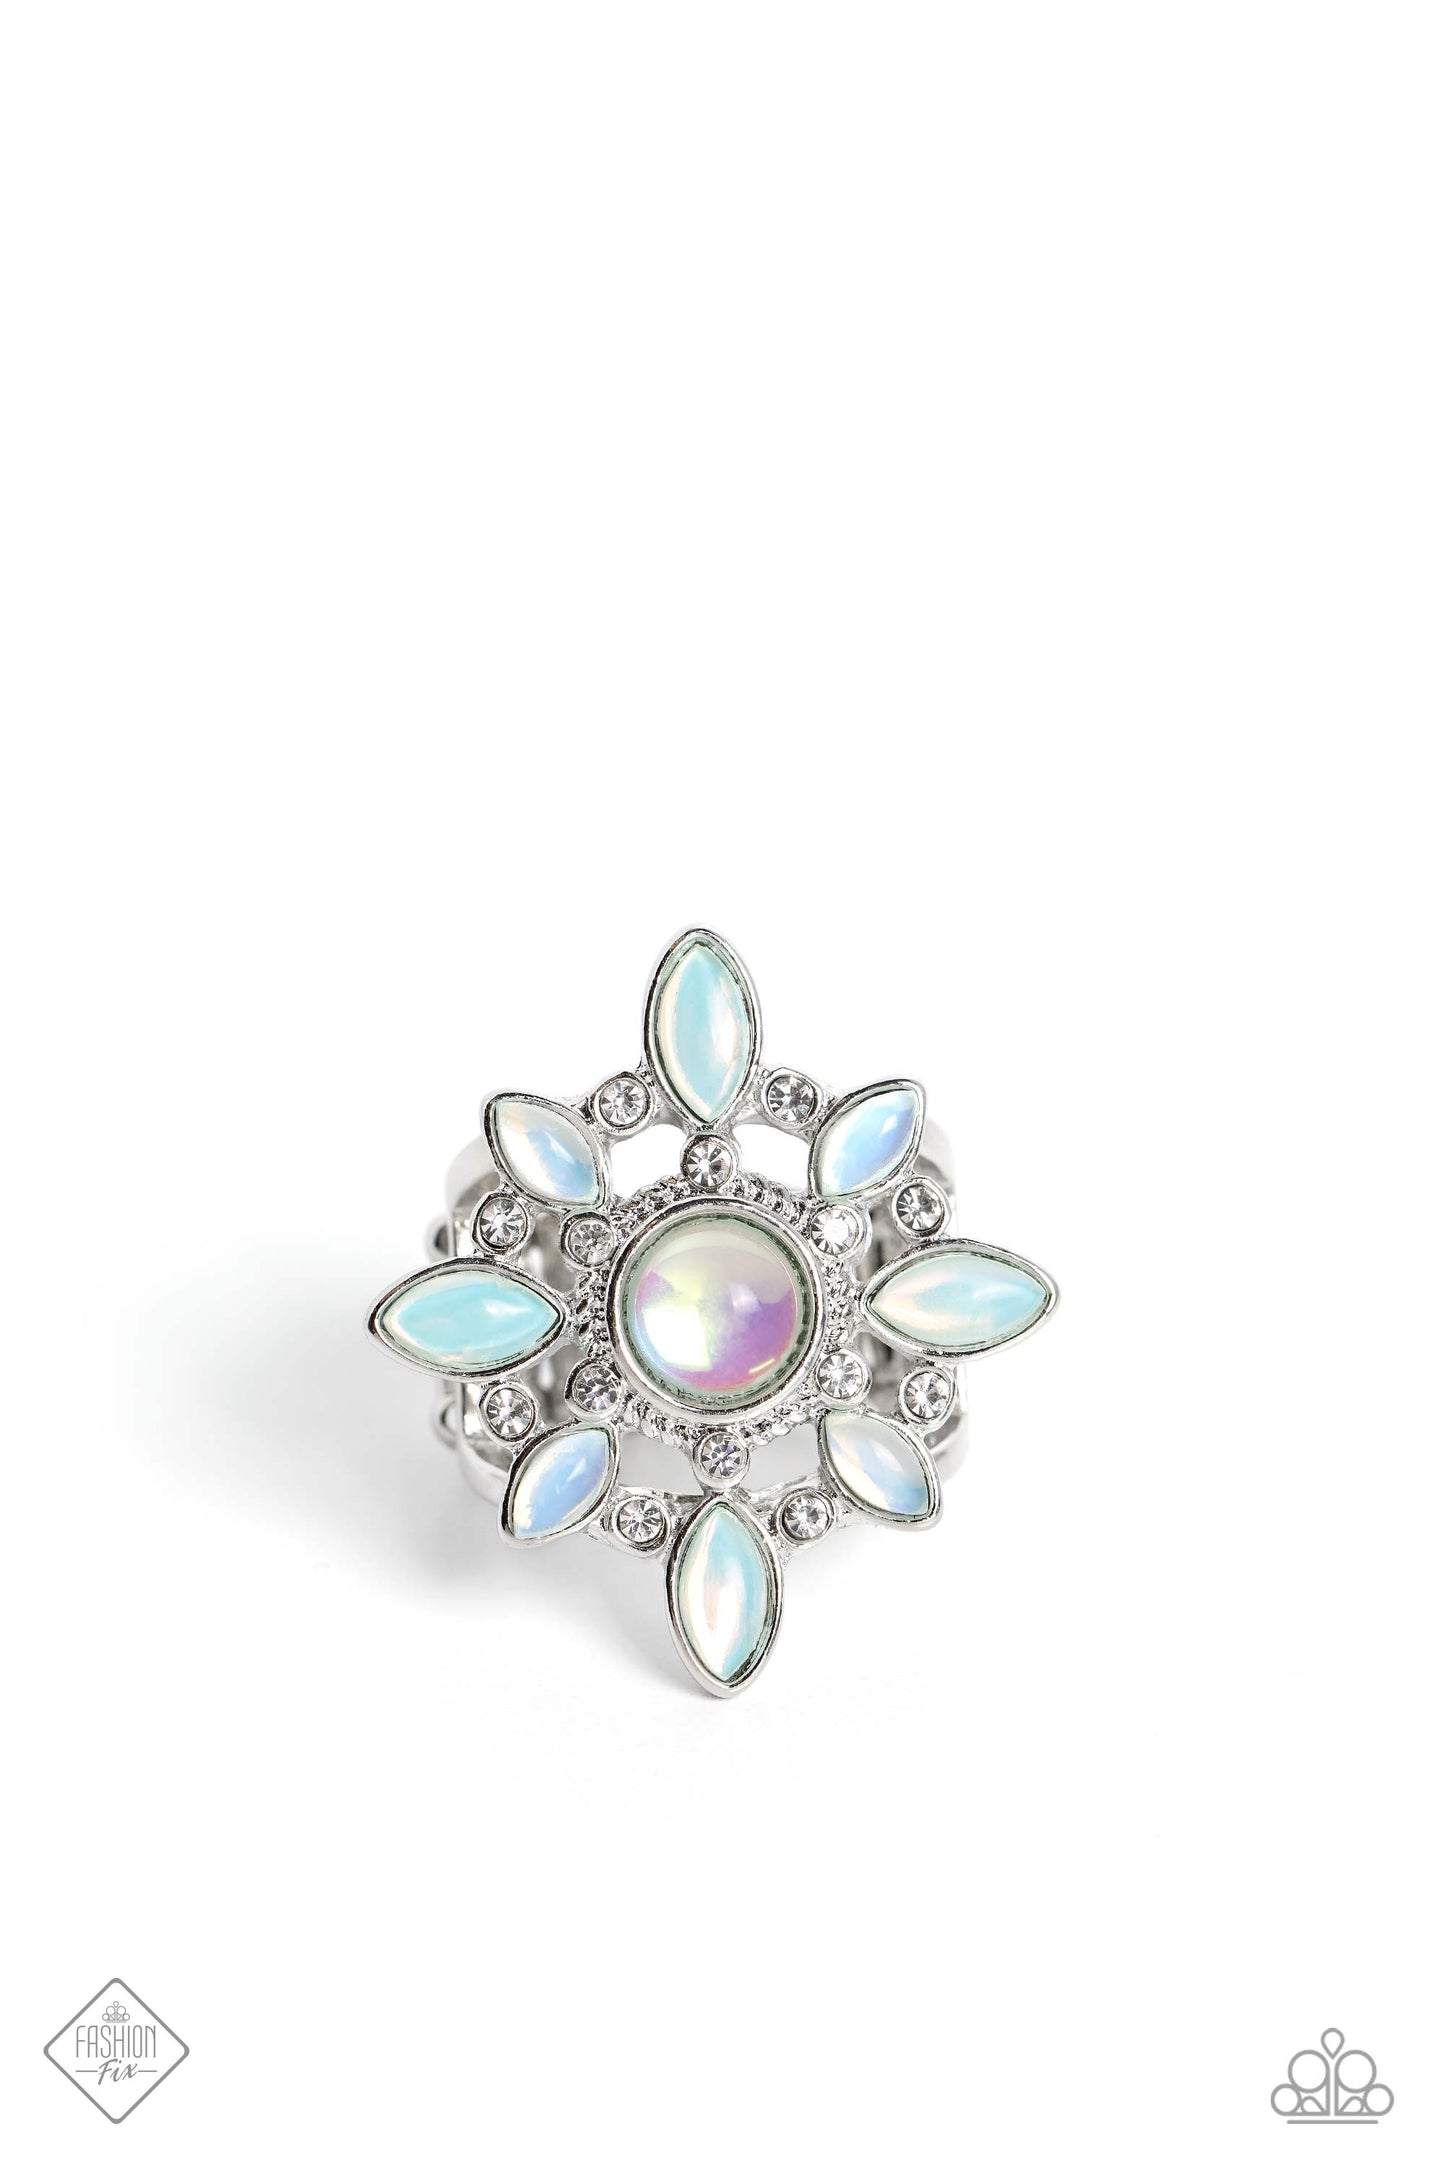 A Summer Spell - Green Opalescent Beaded Floral Design Paparazzi RIng